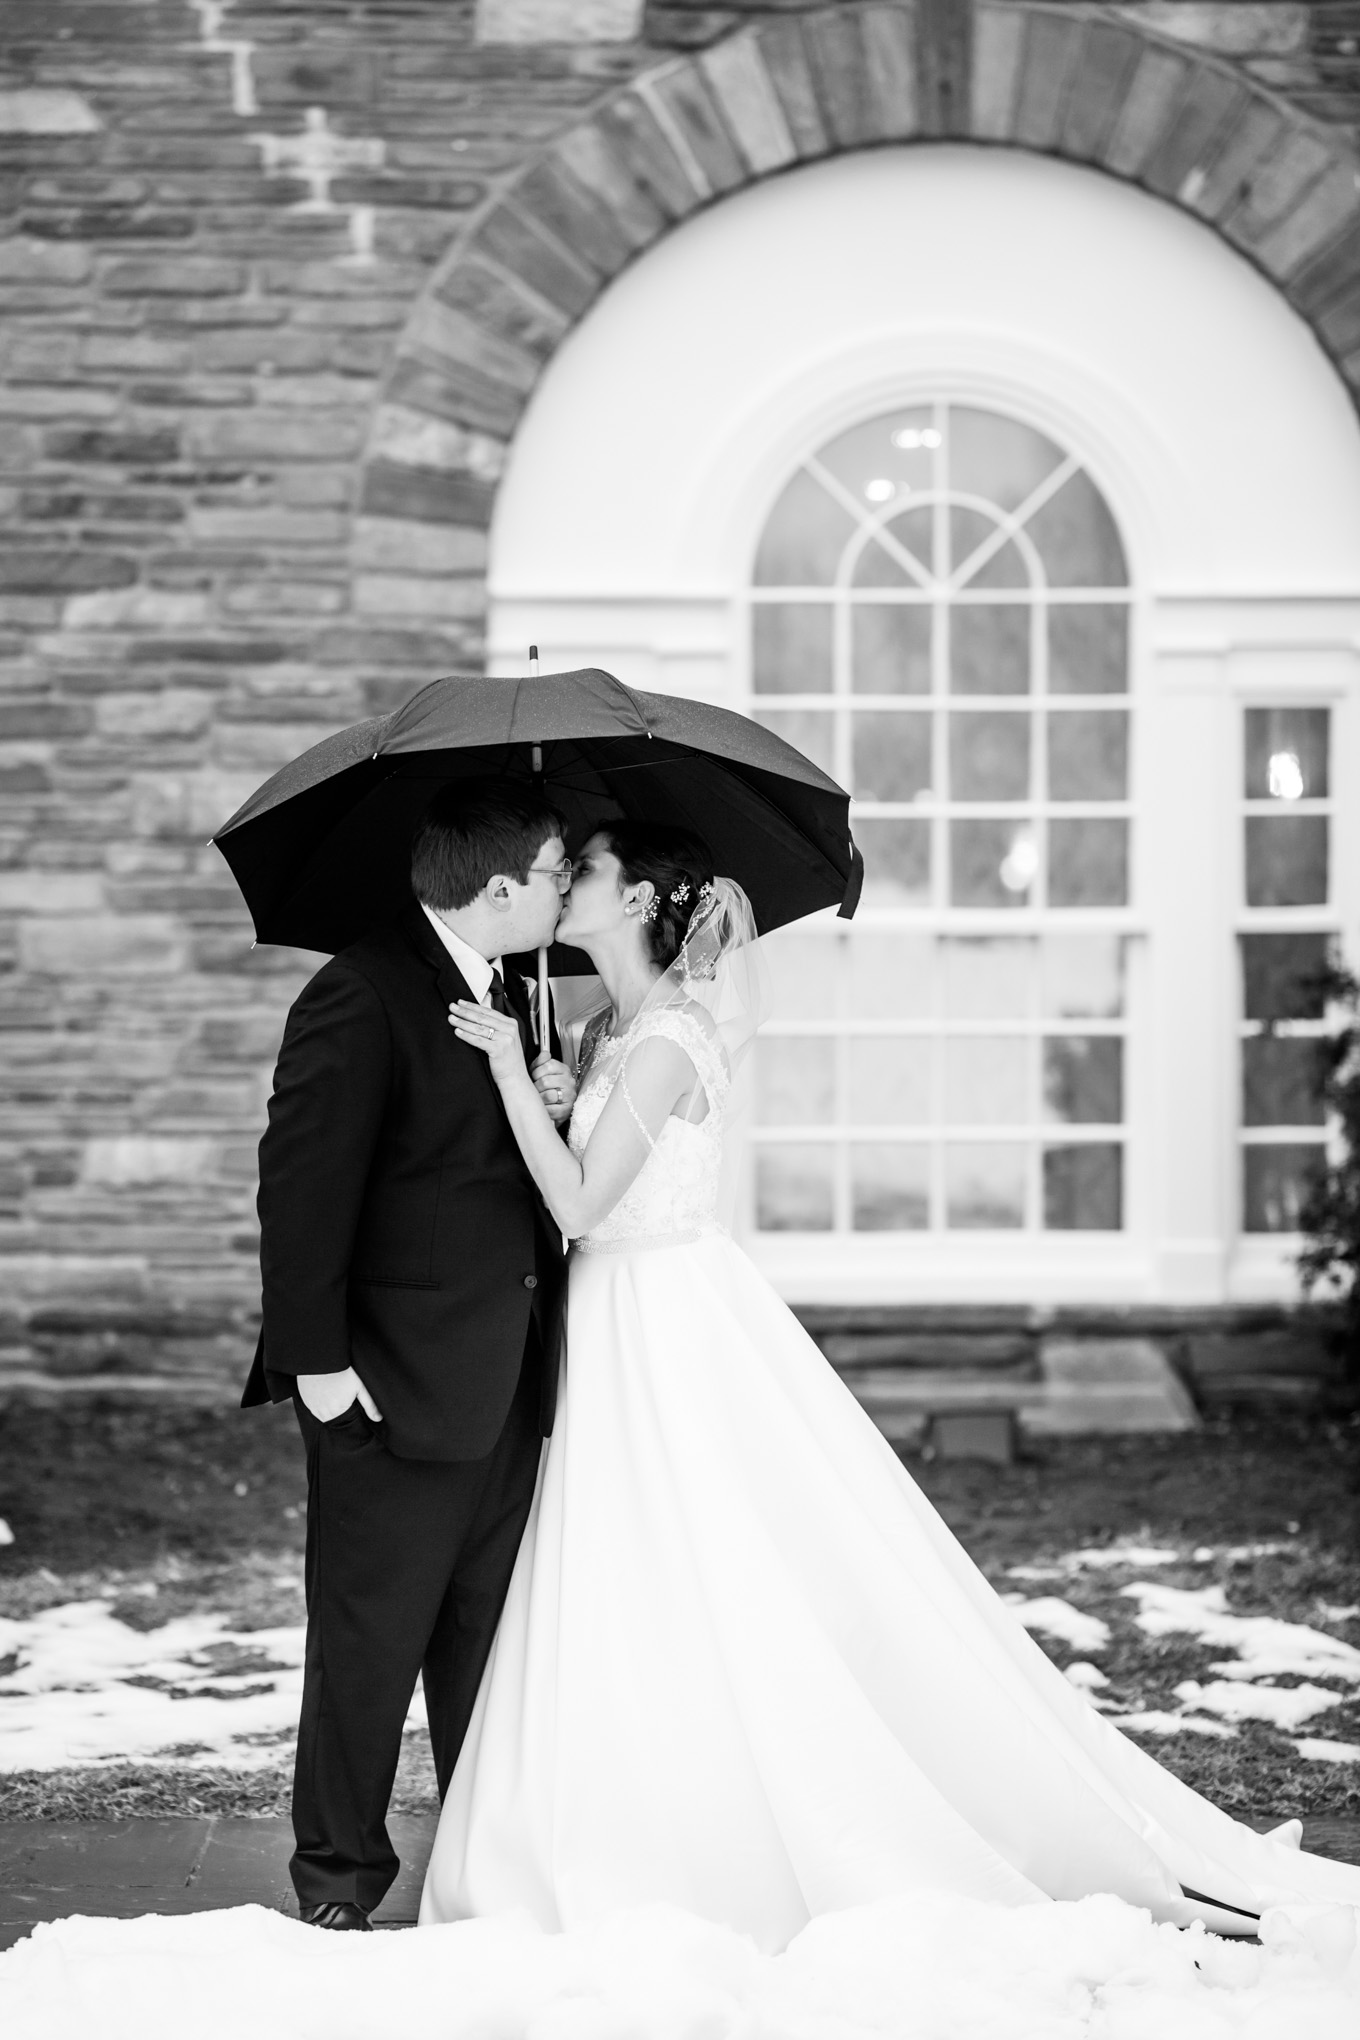 classic winter wedding in Maryland, winter wedding, classic winter wedding, classic wedding, elegant couple, purple aesthetic, church wedding, Maryland wedding, Rachel E.H. Photography, Maryland wedding photographer, natural light portraits, couple goals, relationship goals, classic wedding dress, winter white wedding, DC wedding photographer, black and white wedding portraits, rainy wedding portraits, Glenview Mansion